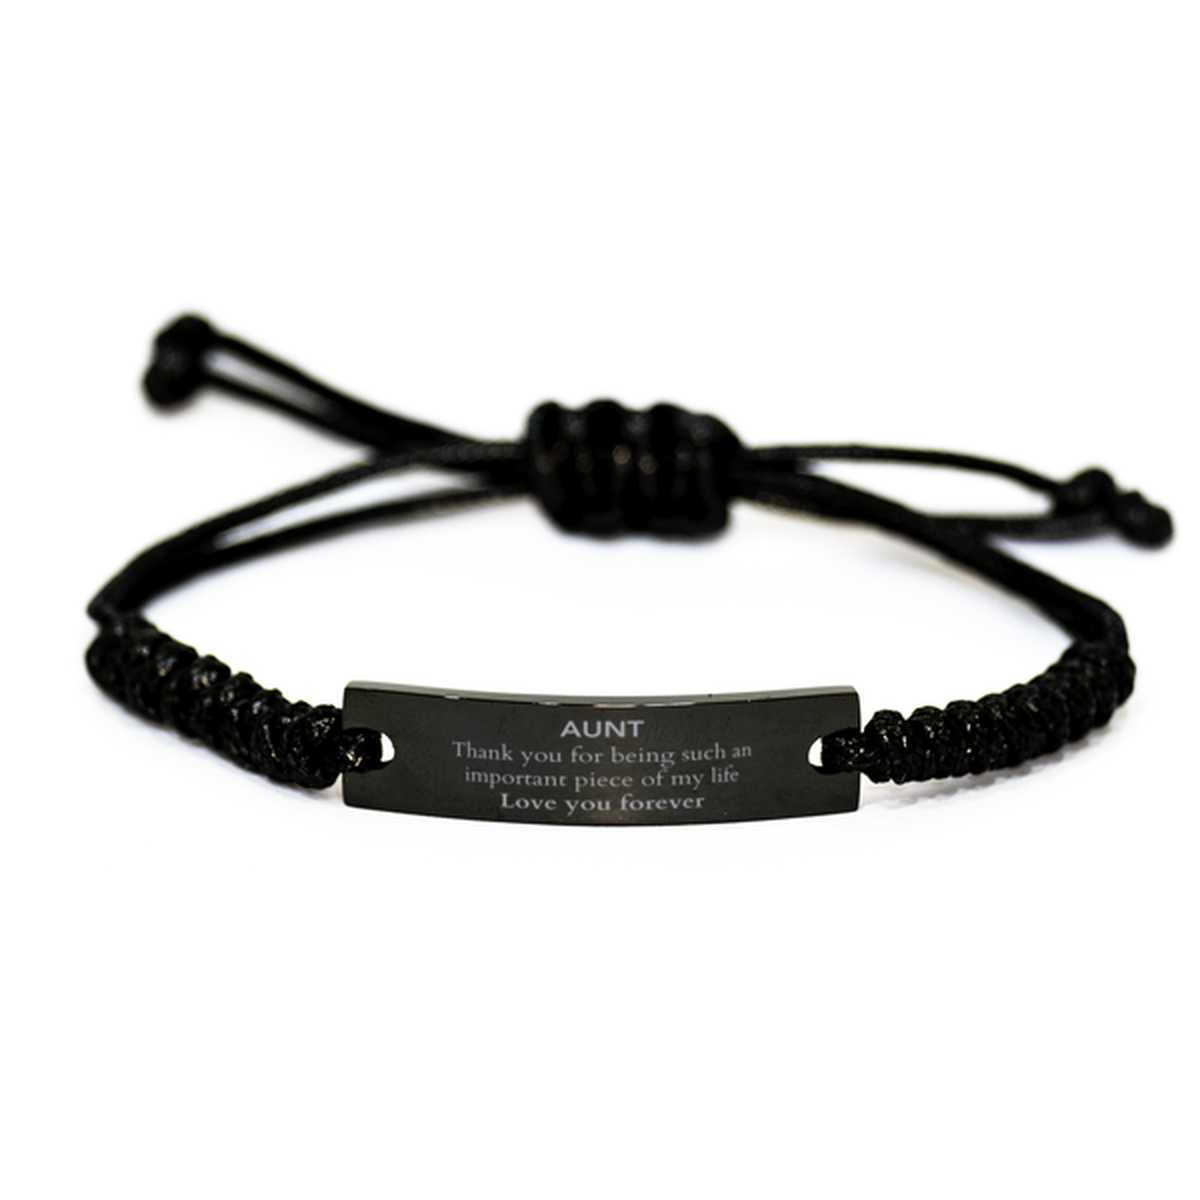 Appropriate Aunt Black Rope Bracelet Epic Birthday Gifts for Aunt Thank you for being such an important piece of my life Aunt Christmas Mothers Fathers Day